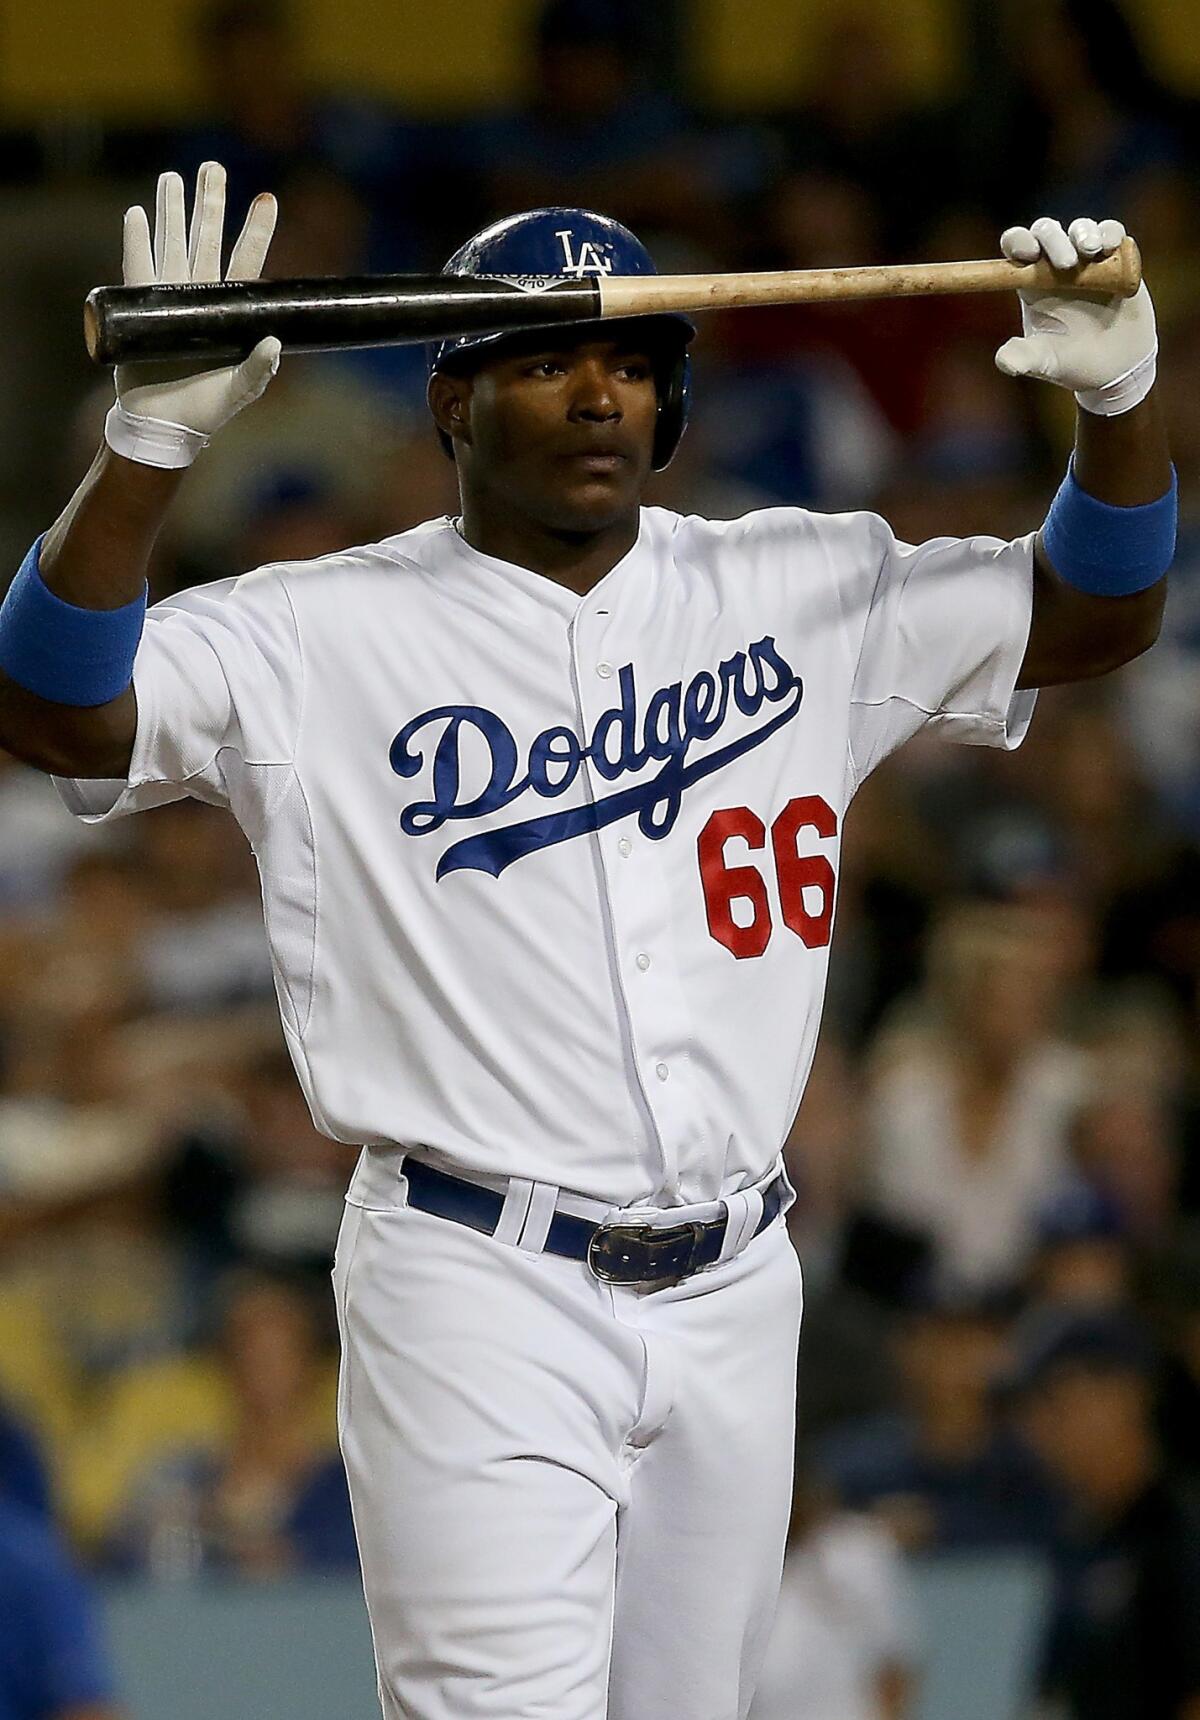 Dodgers General Manager Ned Colletti says rookie outfielder Yasiel Puig has "made a lot of progress" in becoming a more well-rounded player.